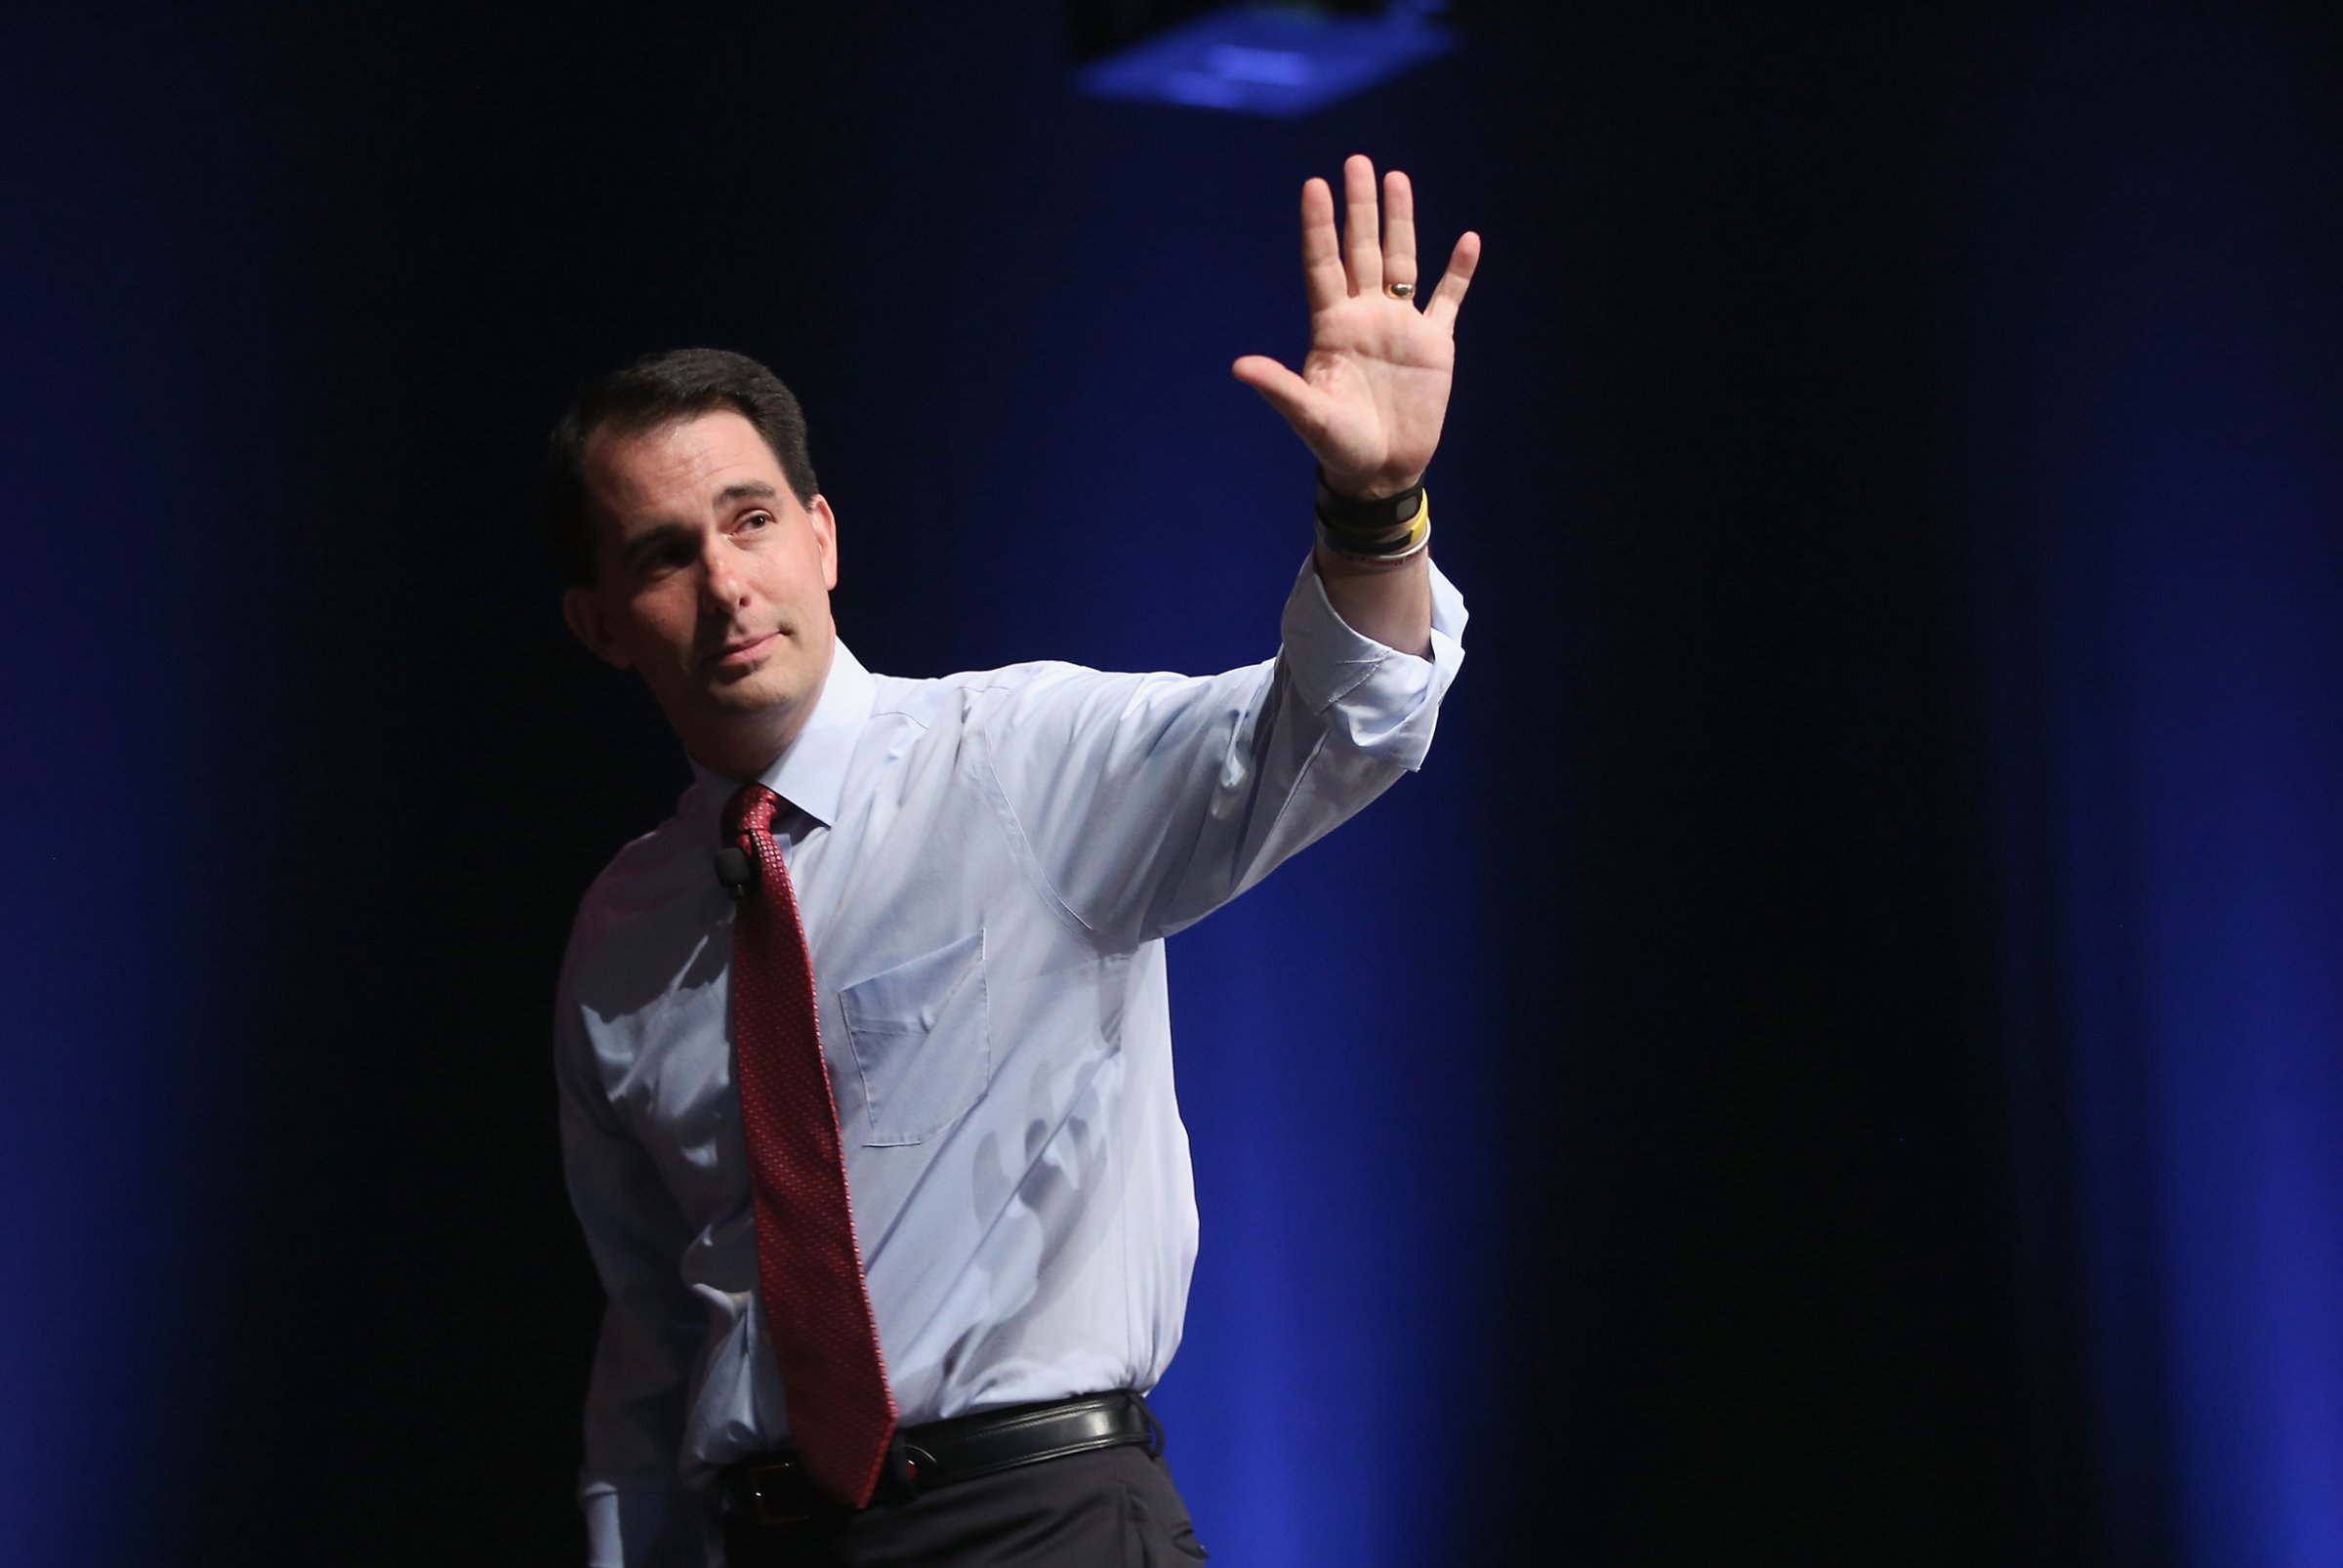 AMES, IA - JULY 18: Republican presidential candidate Wisconsin Governor Scott Walker greets guests at The Family Leadership Summit at Stephens Auditorium on July 18, 2015 in Ames, Iowa. According to the organizers, the purpose of The Family Leadership Summit is to inspire, motivate, and educate conservatives. (Photo by Scott Olson/Getty Images)